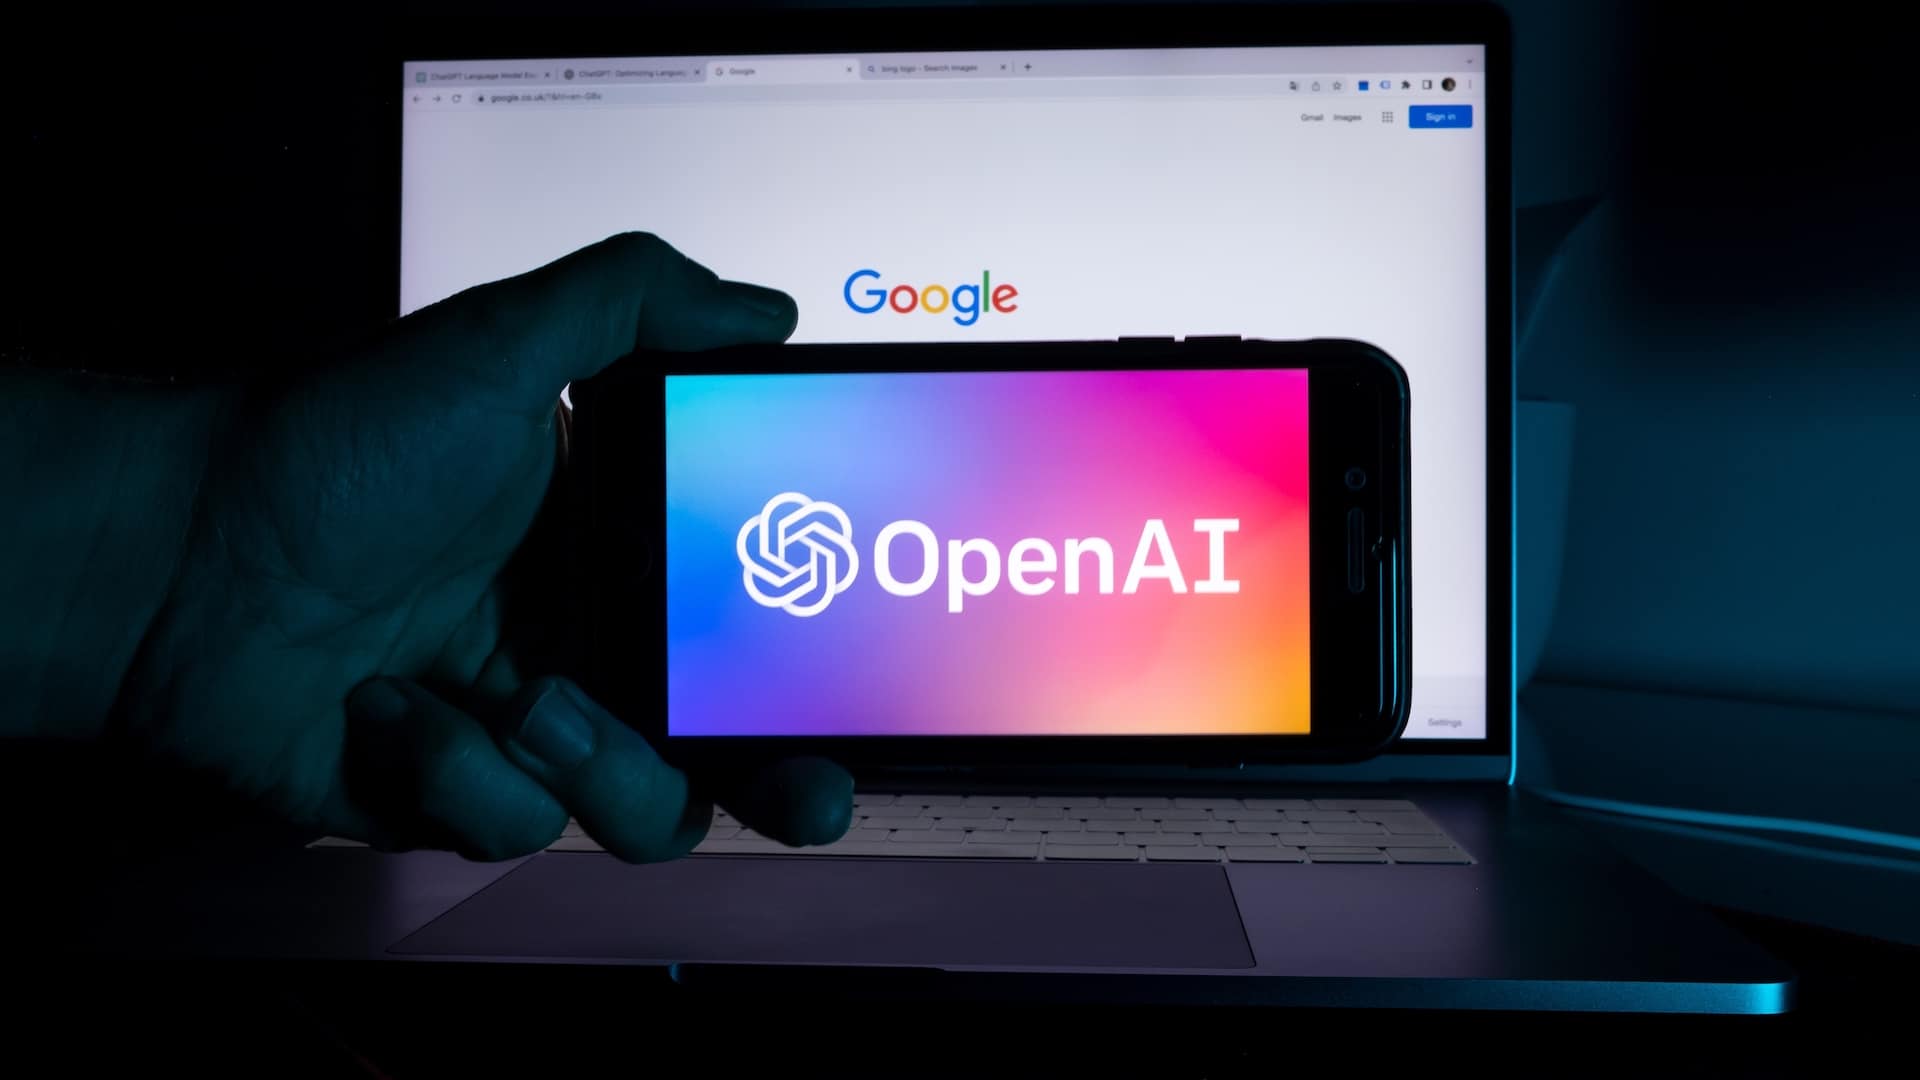 OpenAI vs. Google: Is a New Search & AI Assistant Coming? (Livestream May 13th)